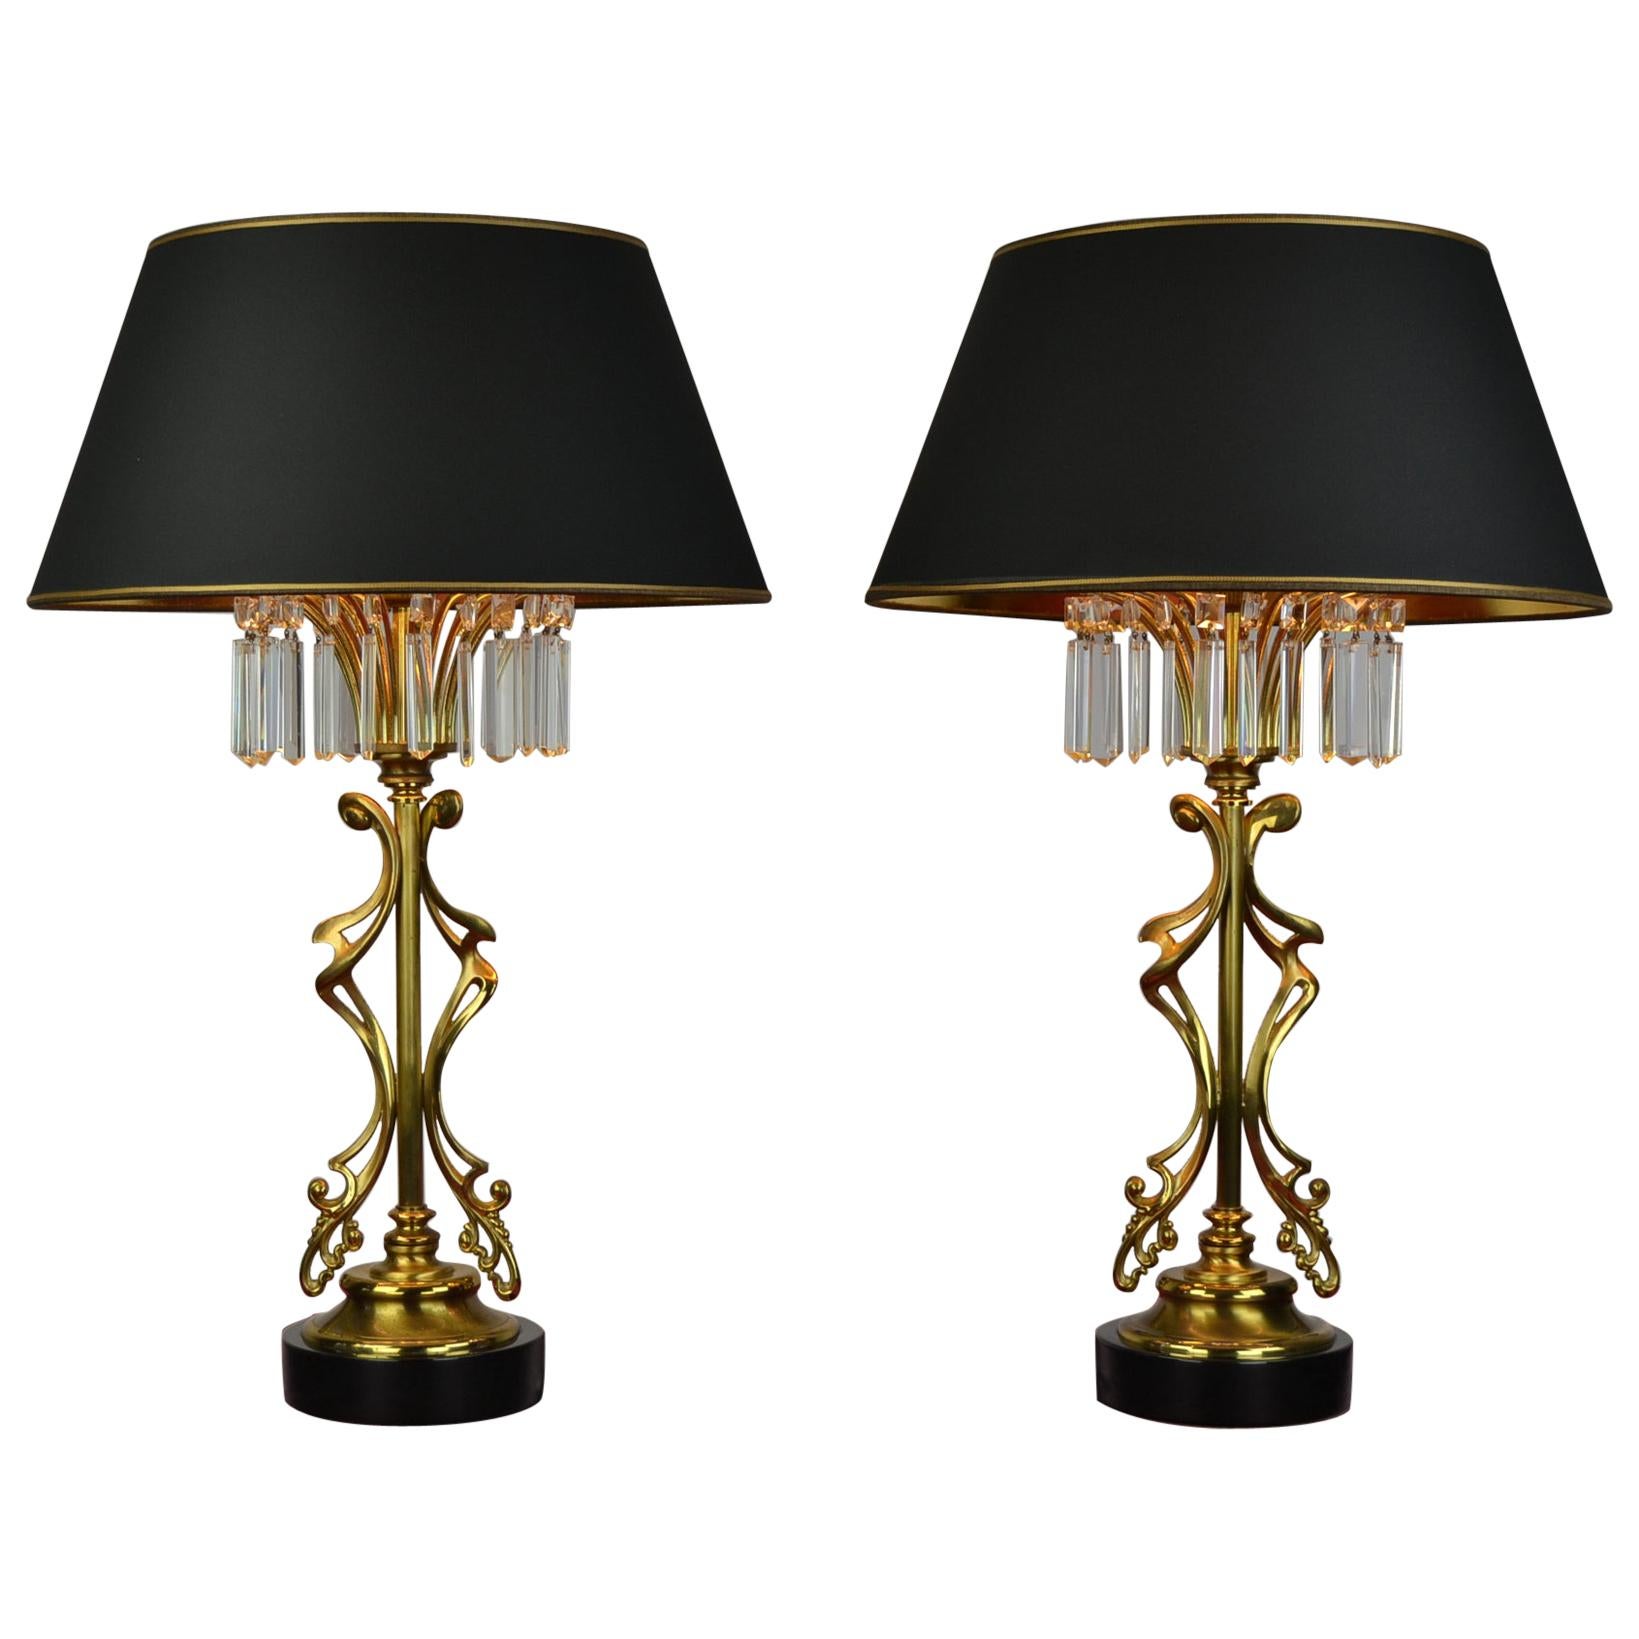 Pair of Brass with Crystal Table Lamps by Deknudt, Belgium, 1970s